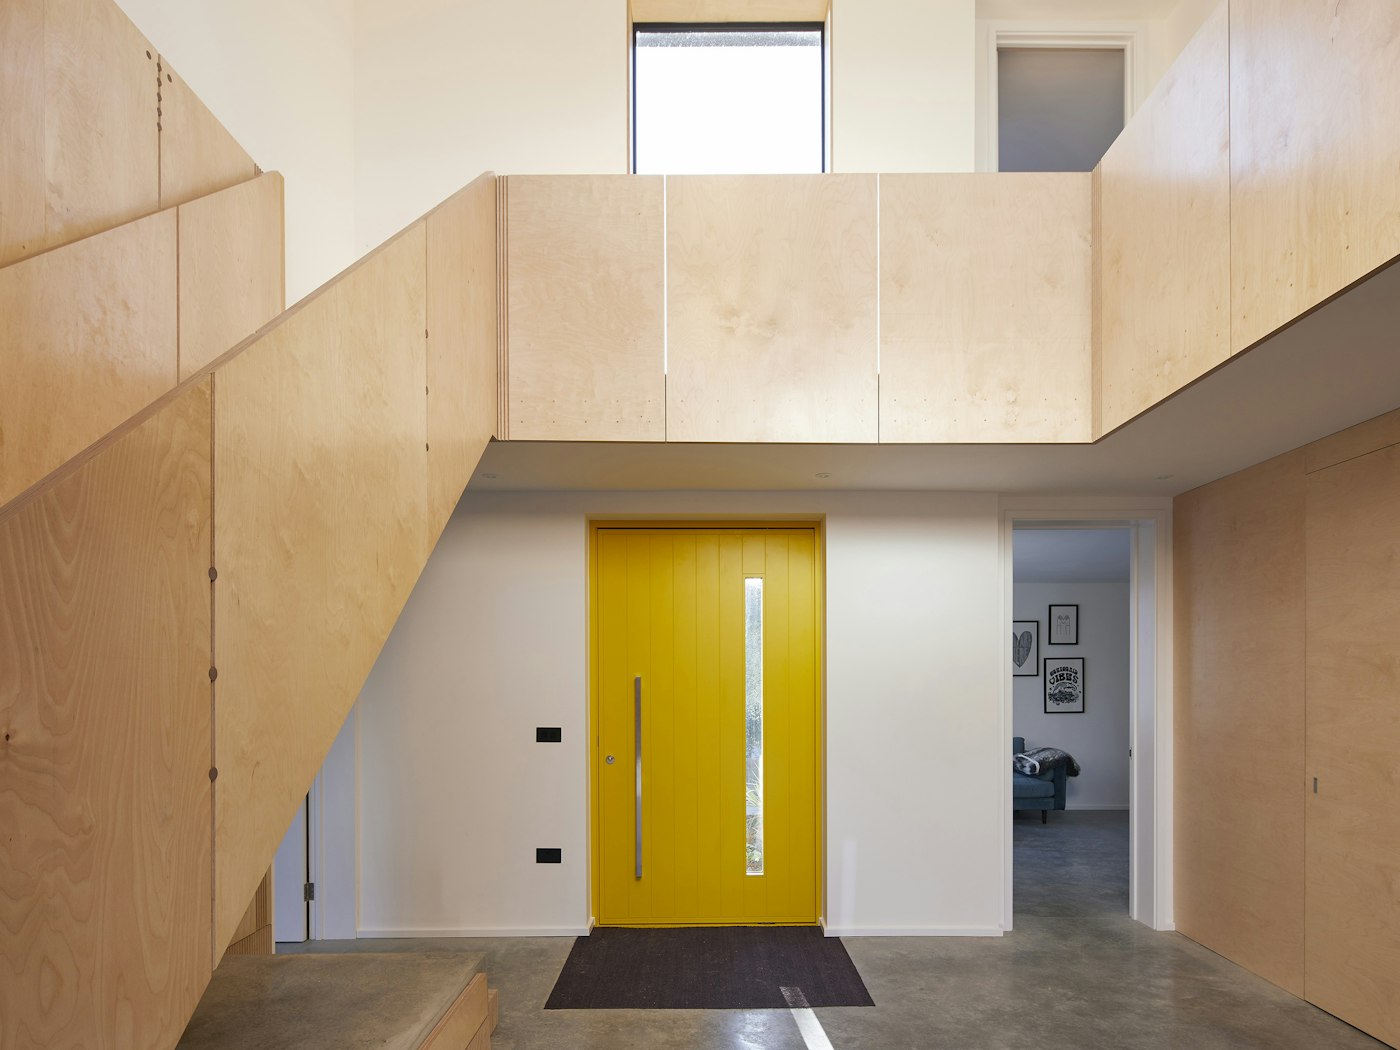 The bold yellow door makes an impactful statement on the entrance hall